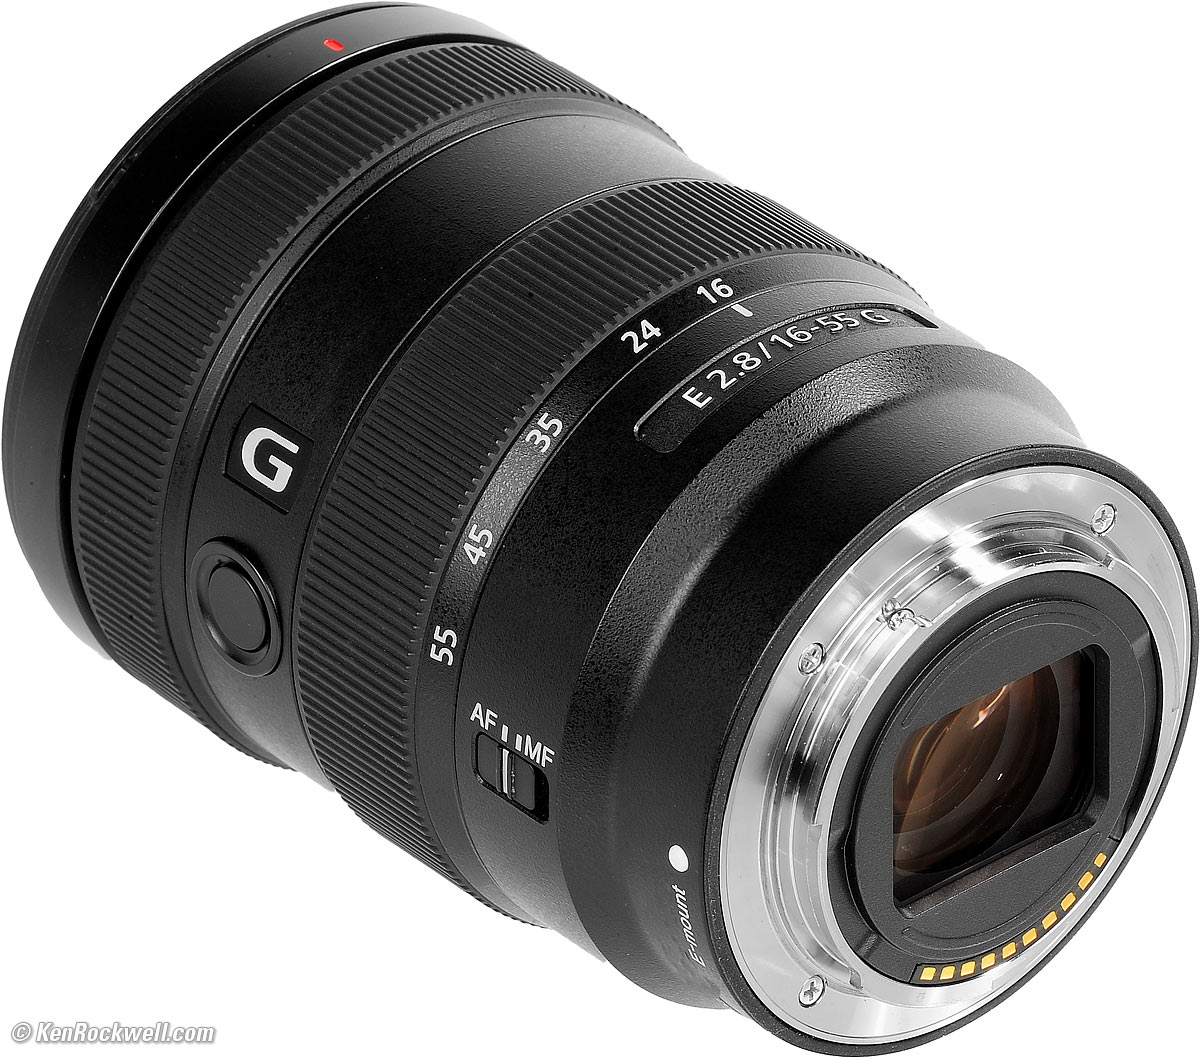 Sony E 16-55mm f/2.8 G Review